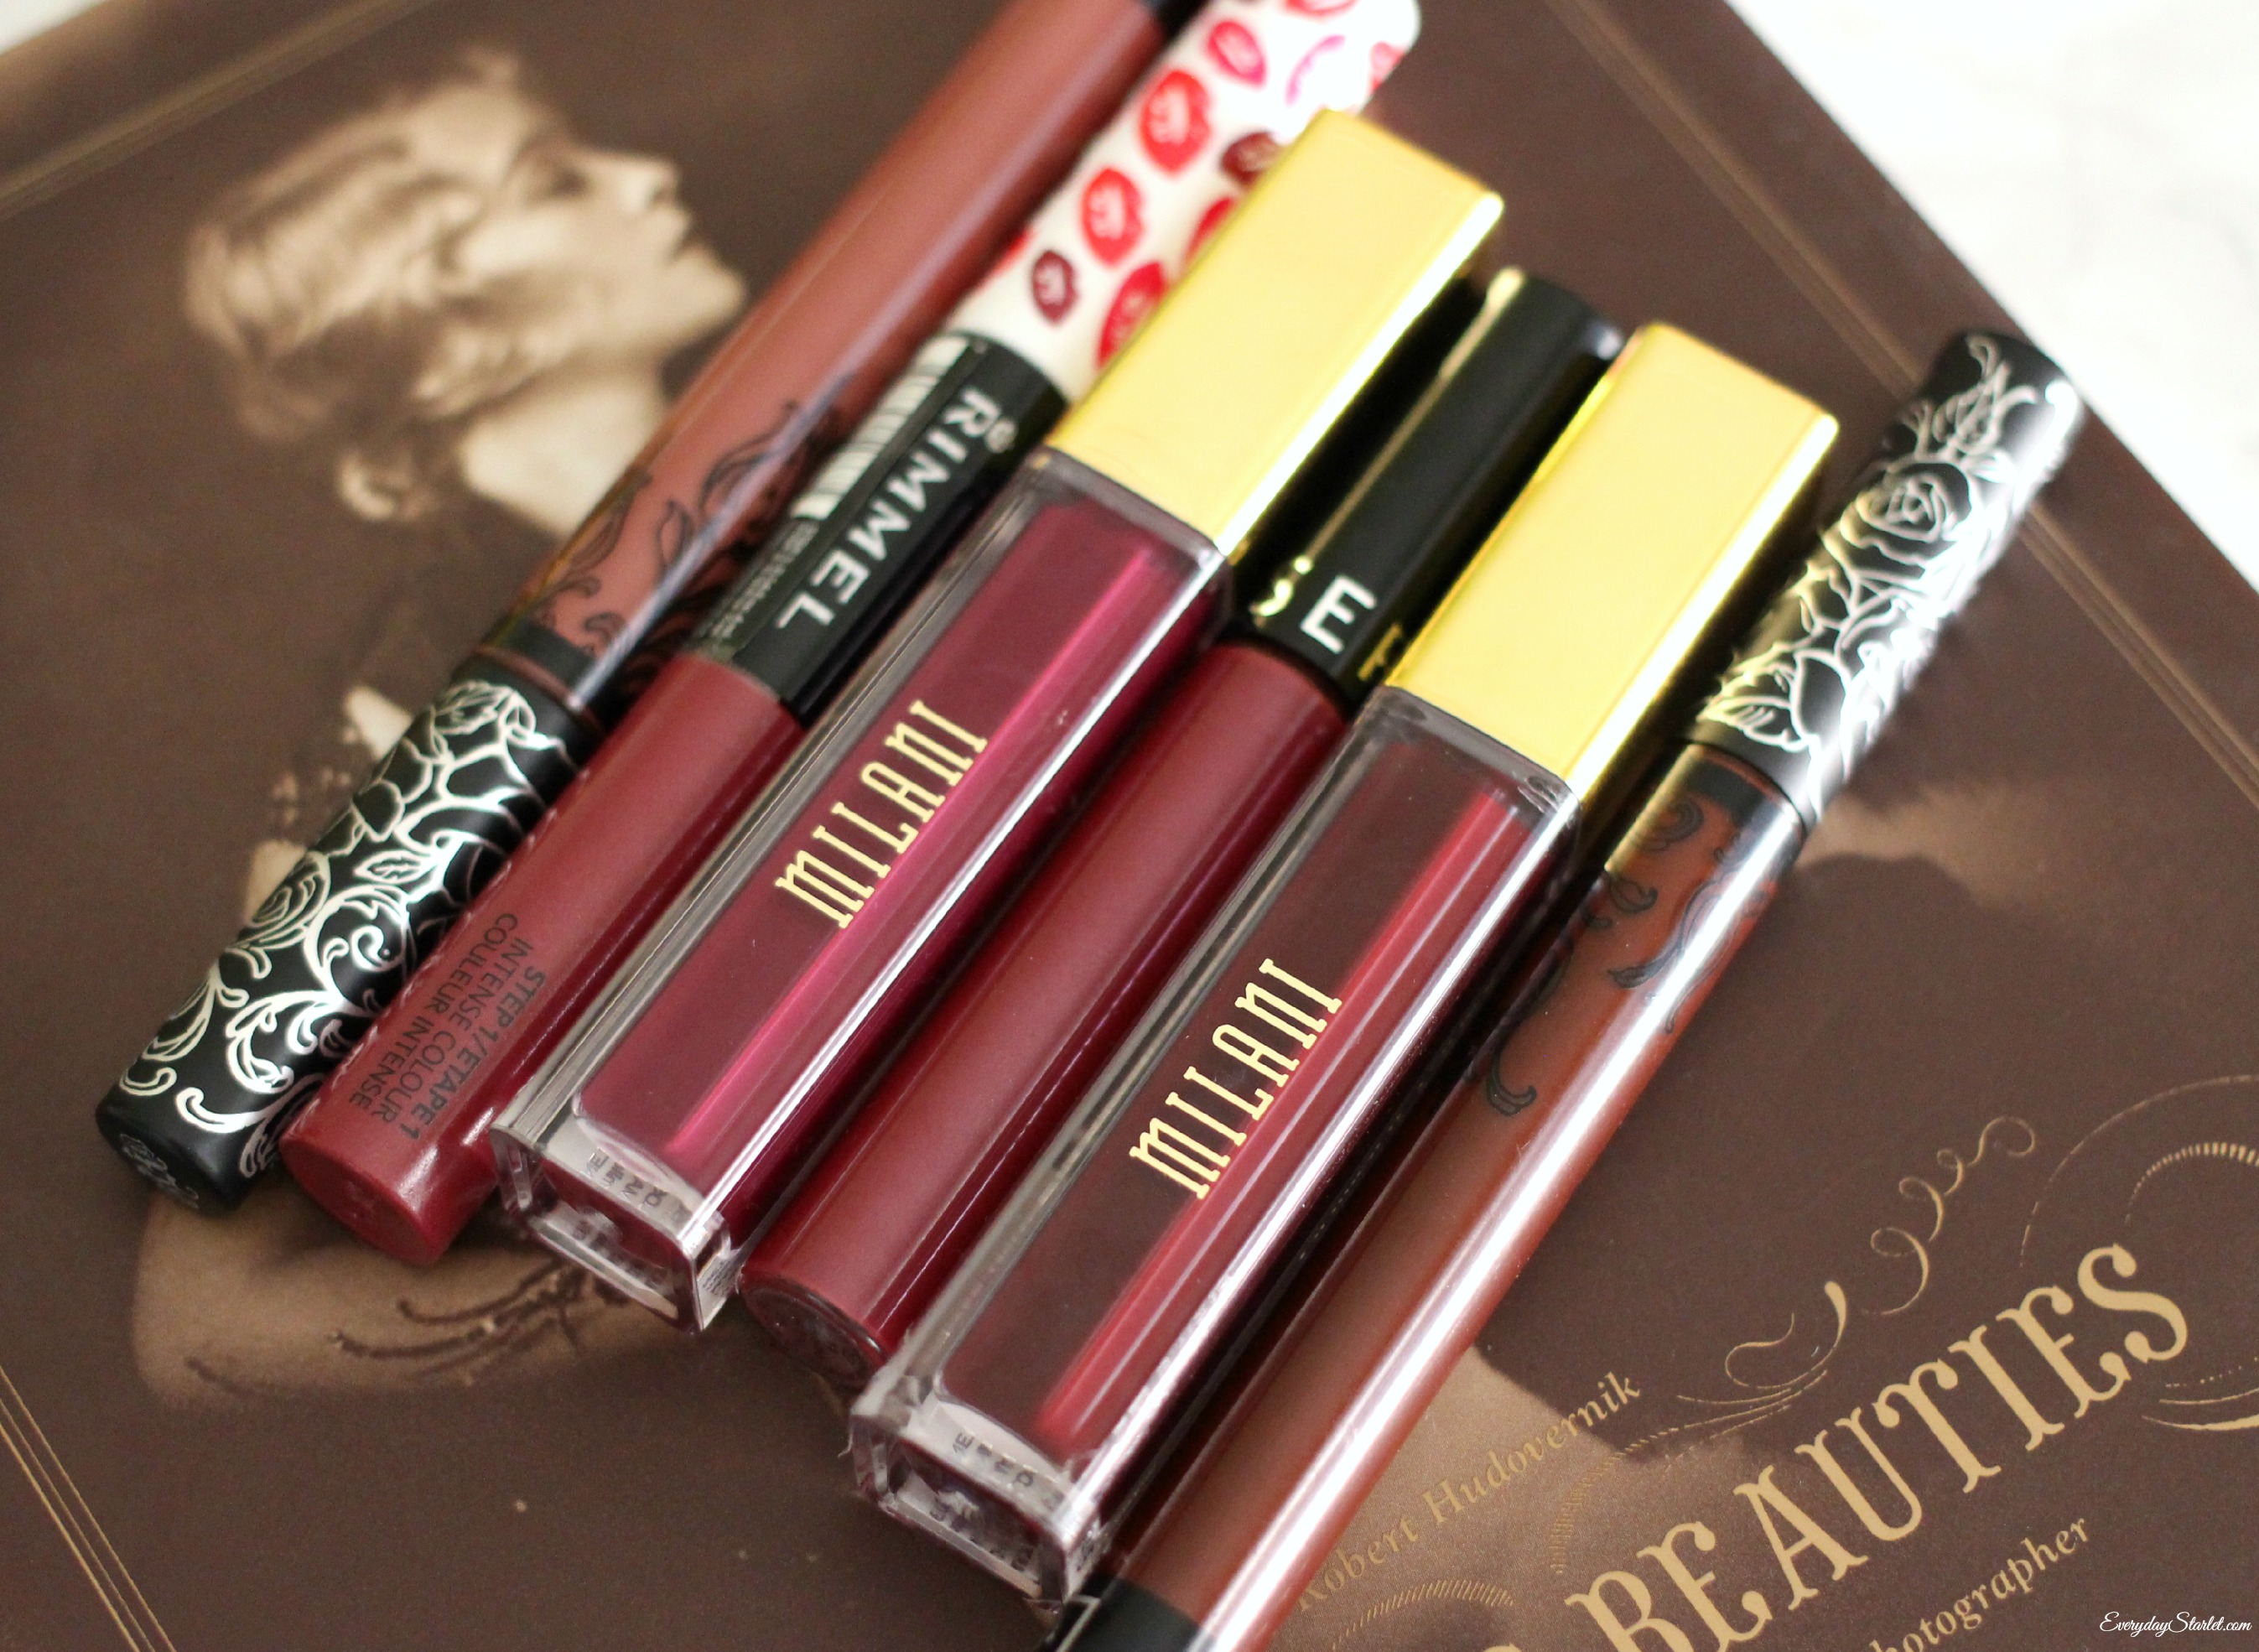 Vampy Lips for Everyone…a shade for every comfort level